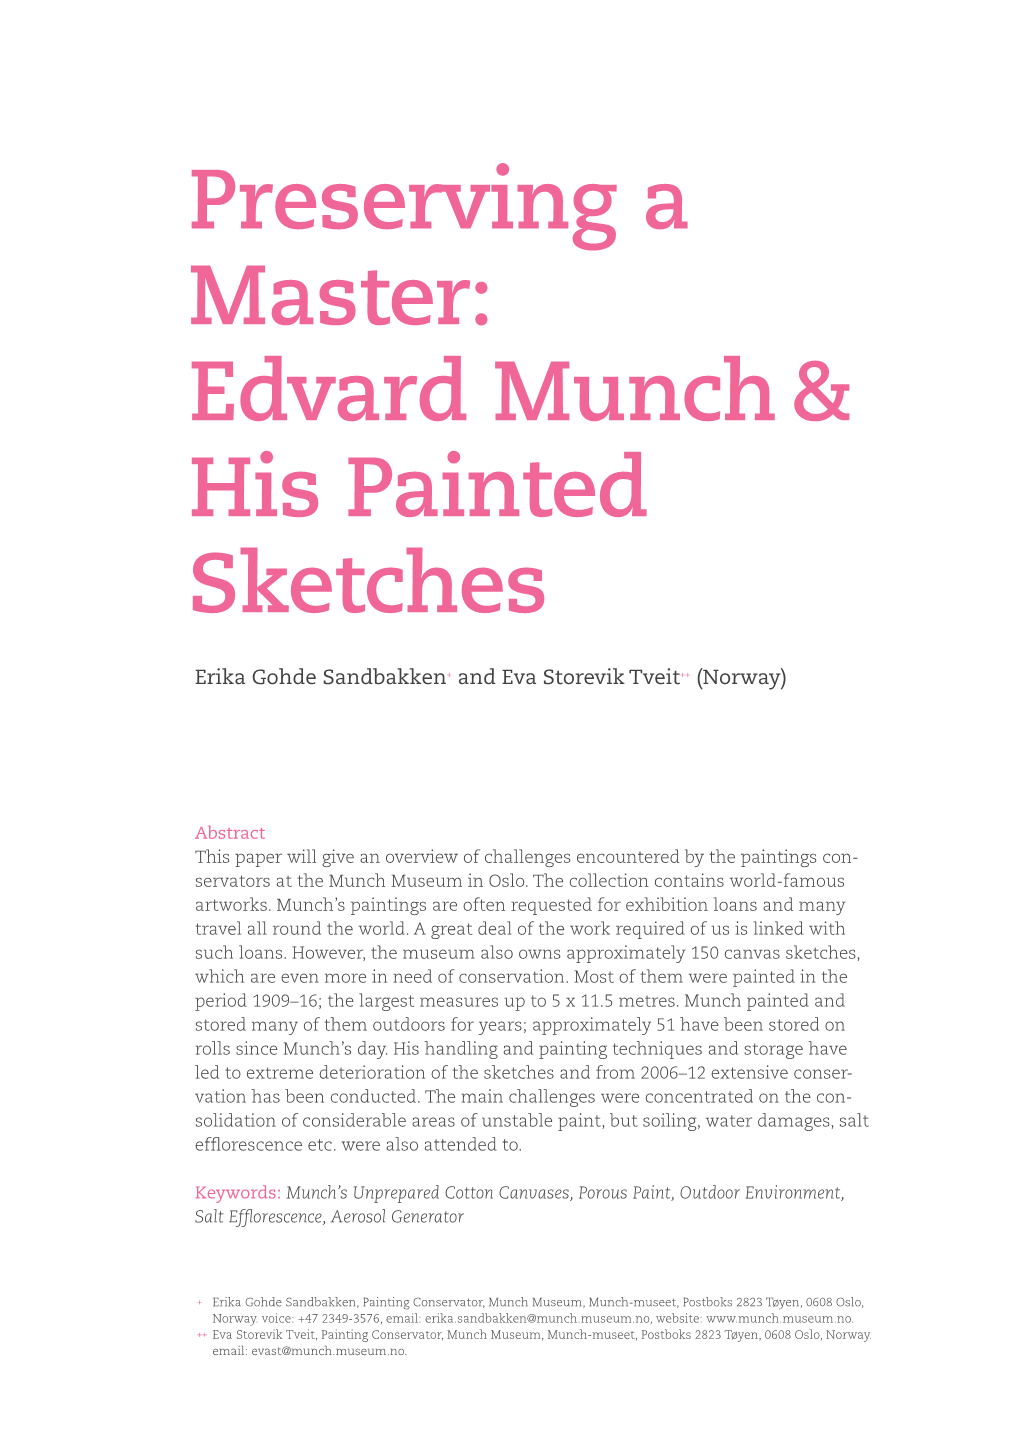 Edvard Munch & His Painted Sketches